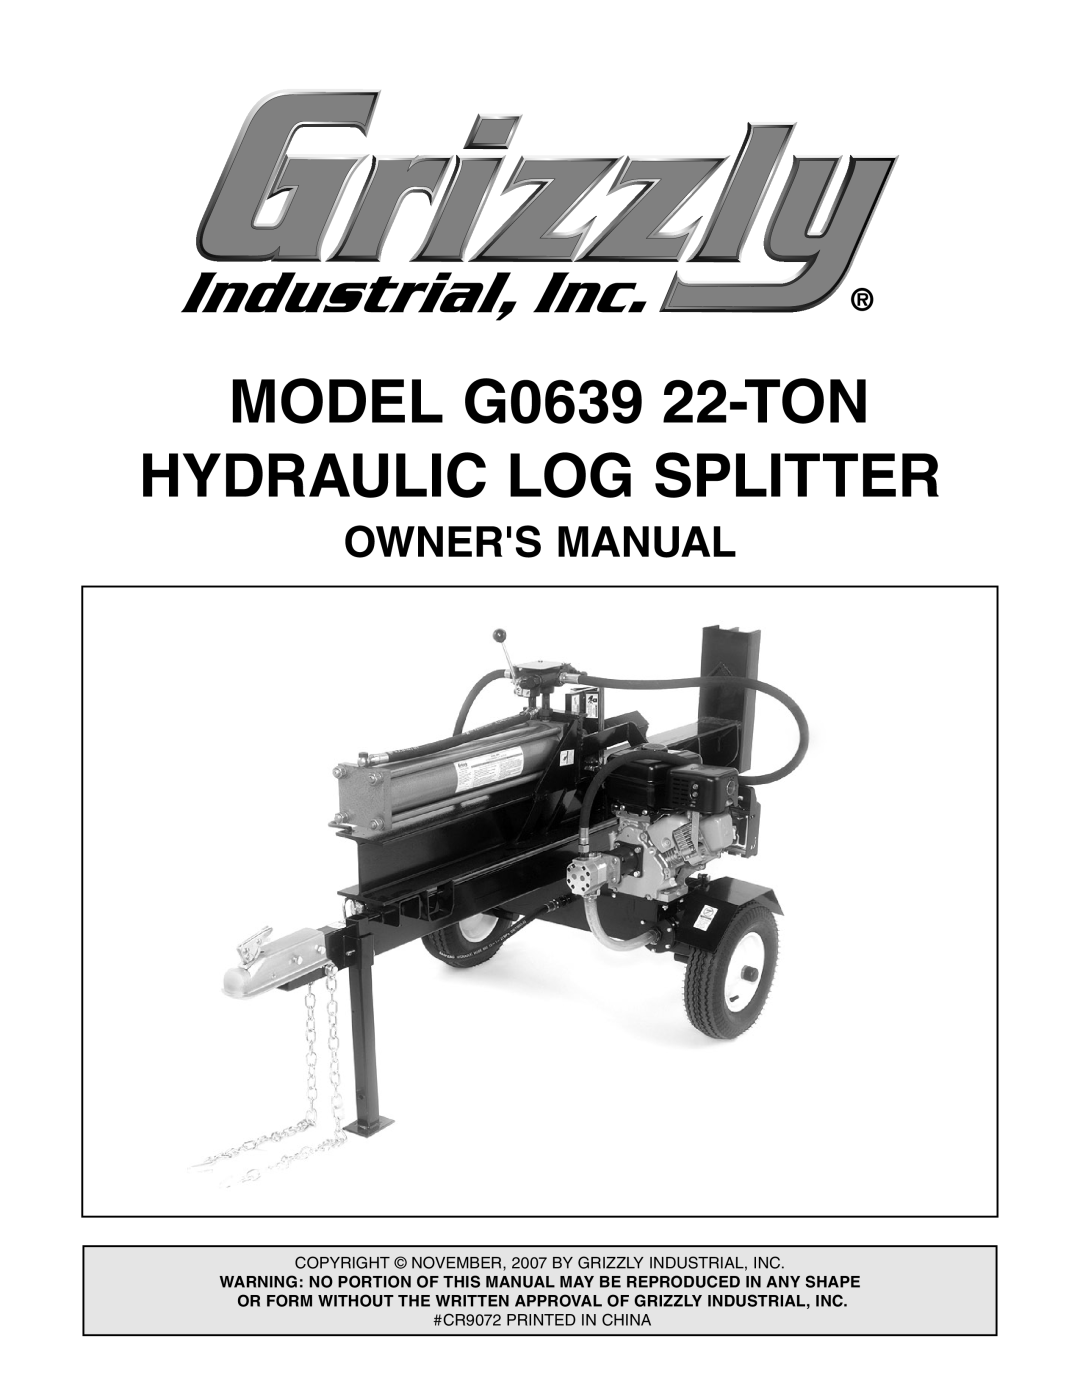 Grizzly owner manual MODEL G0639 22-TON HYDRAULIC LOG SPLITTER 